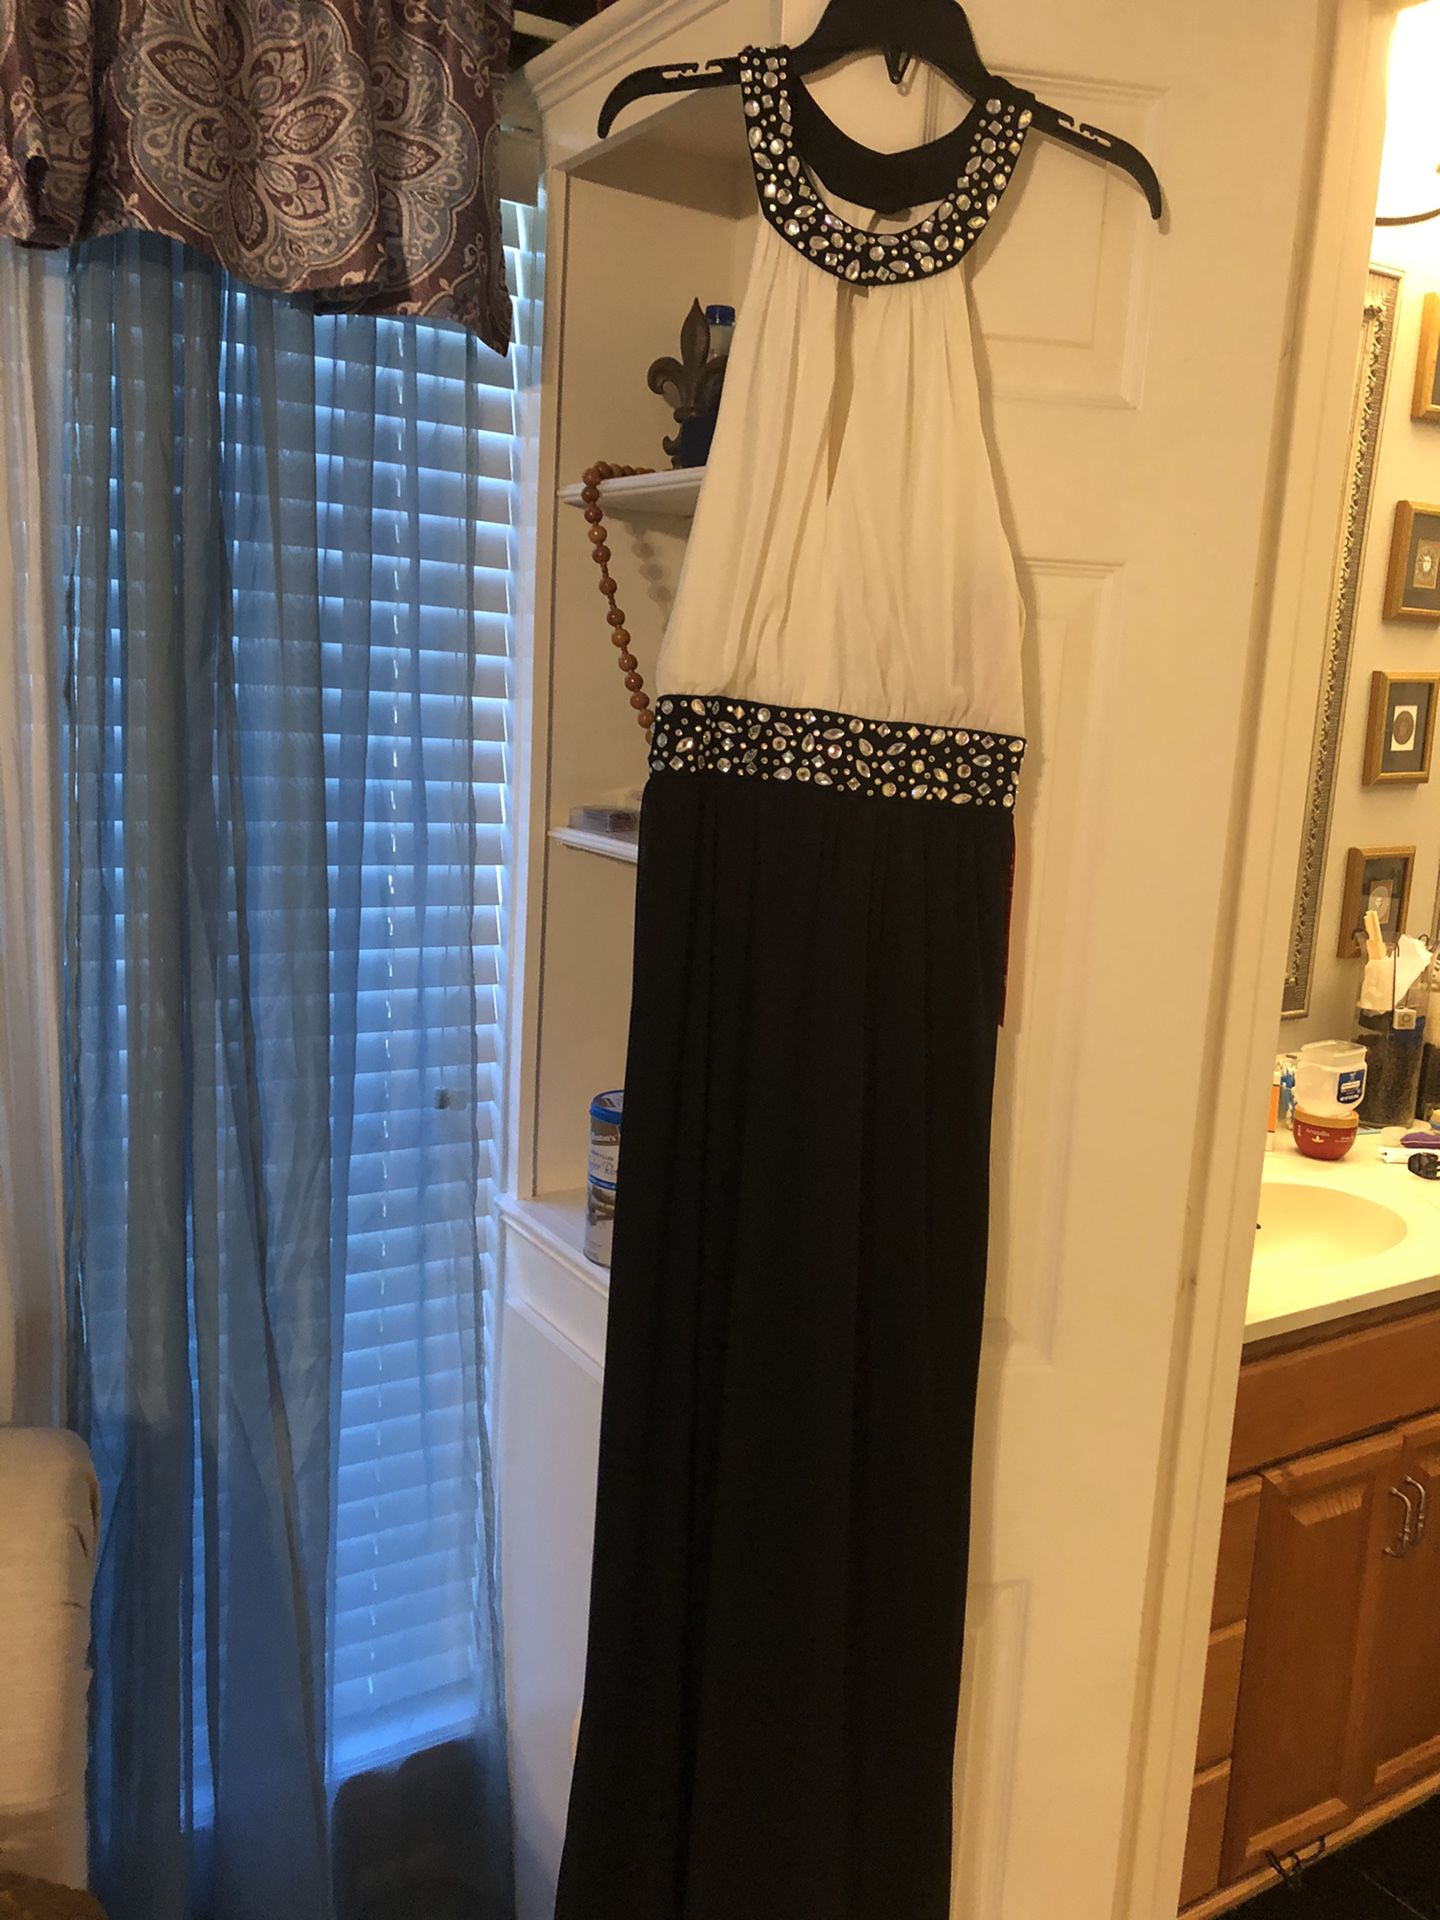 New Black and white dress size small